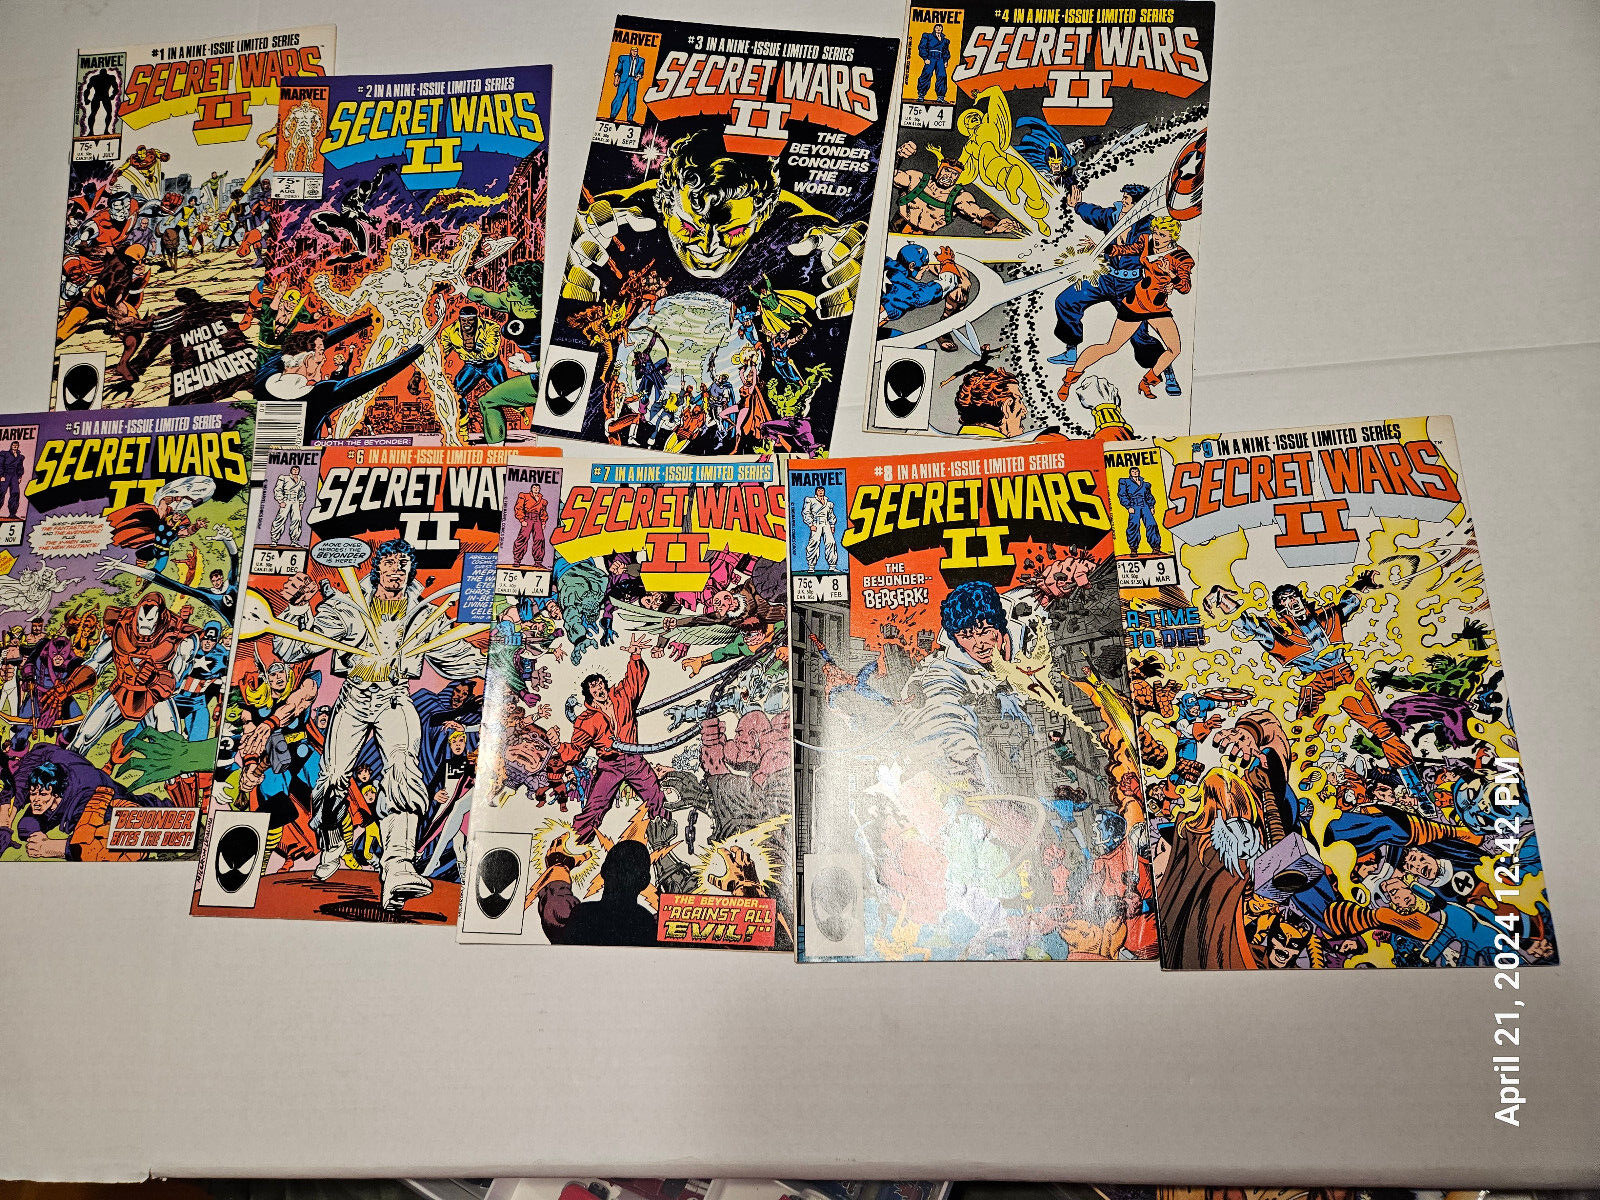 marvel comics secret wars 2 (all 9 issues in limited series)